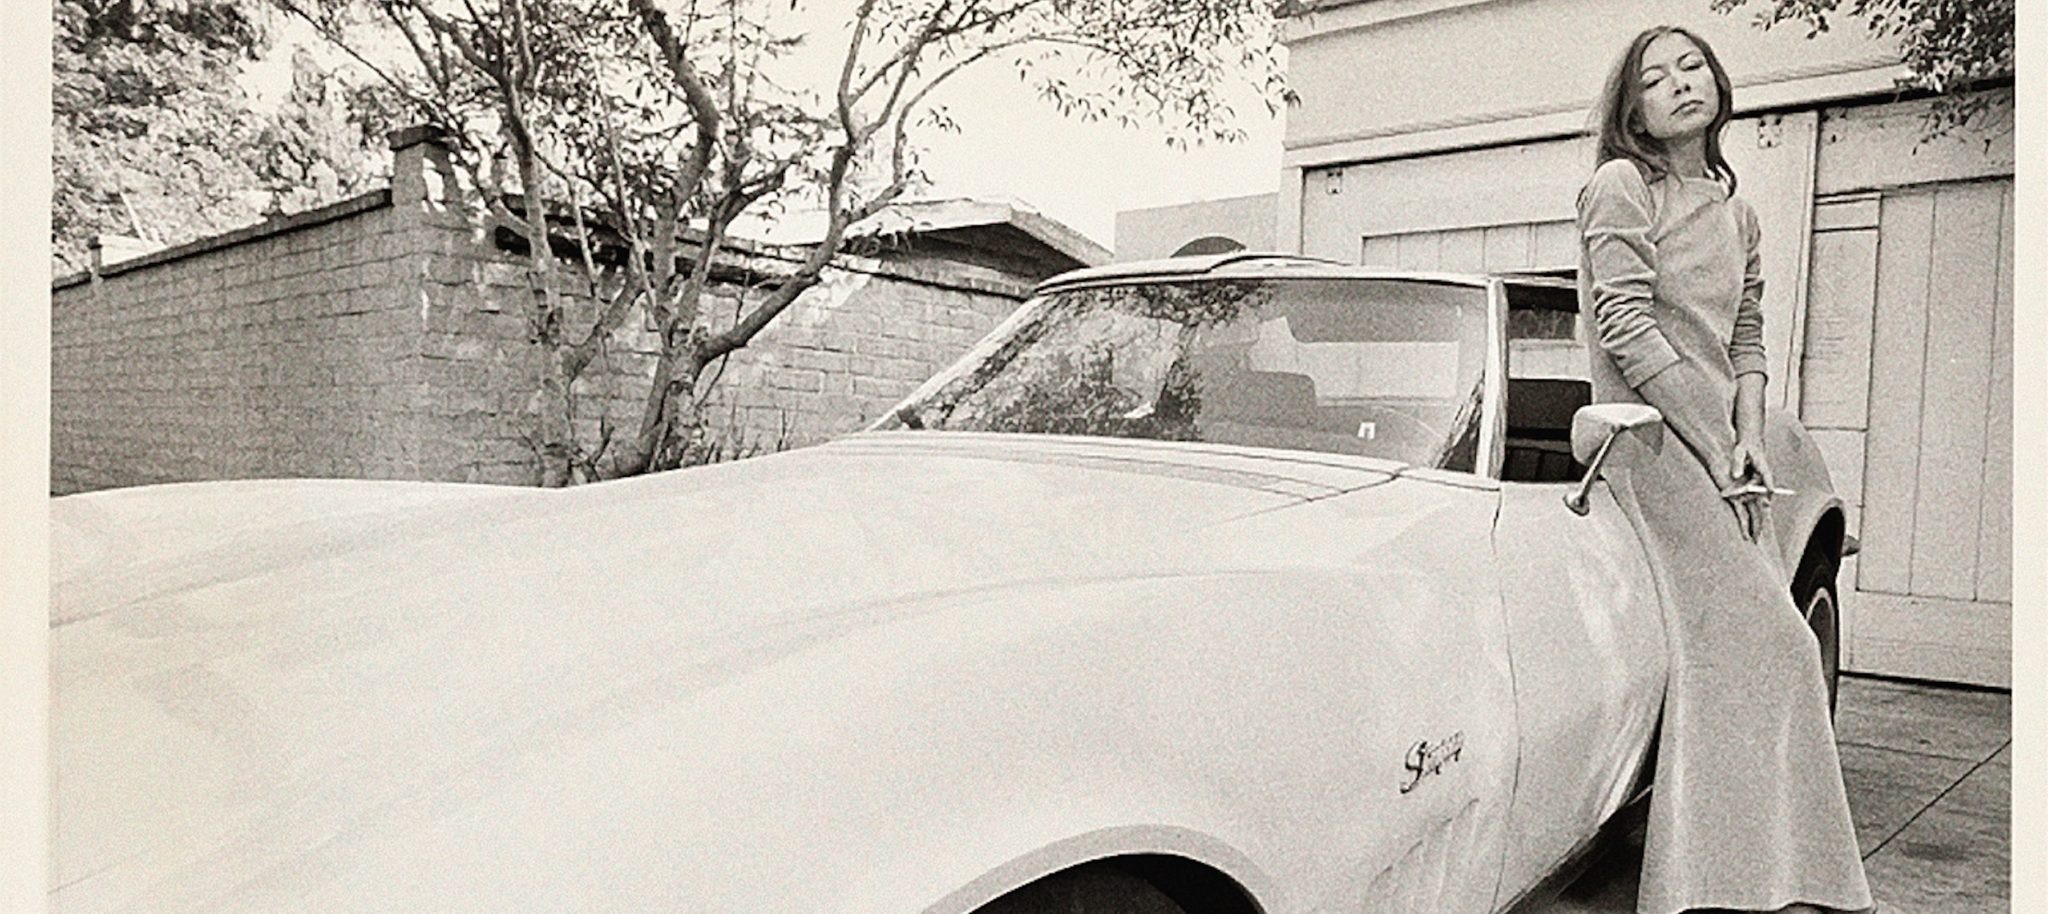 Joan Didion leaning against a car